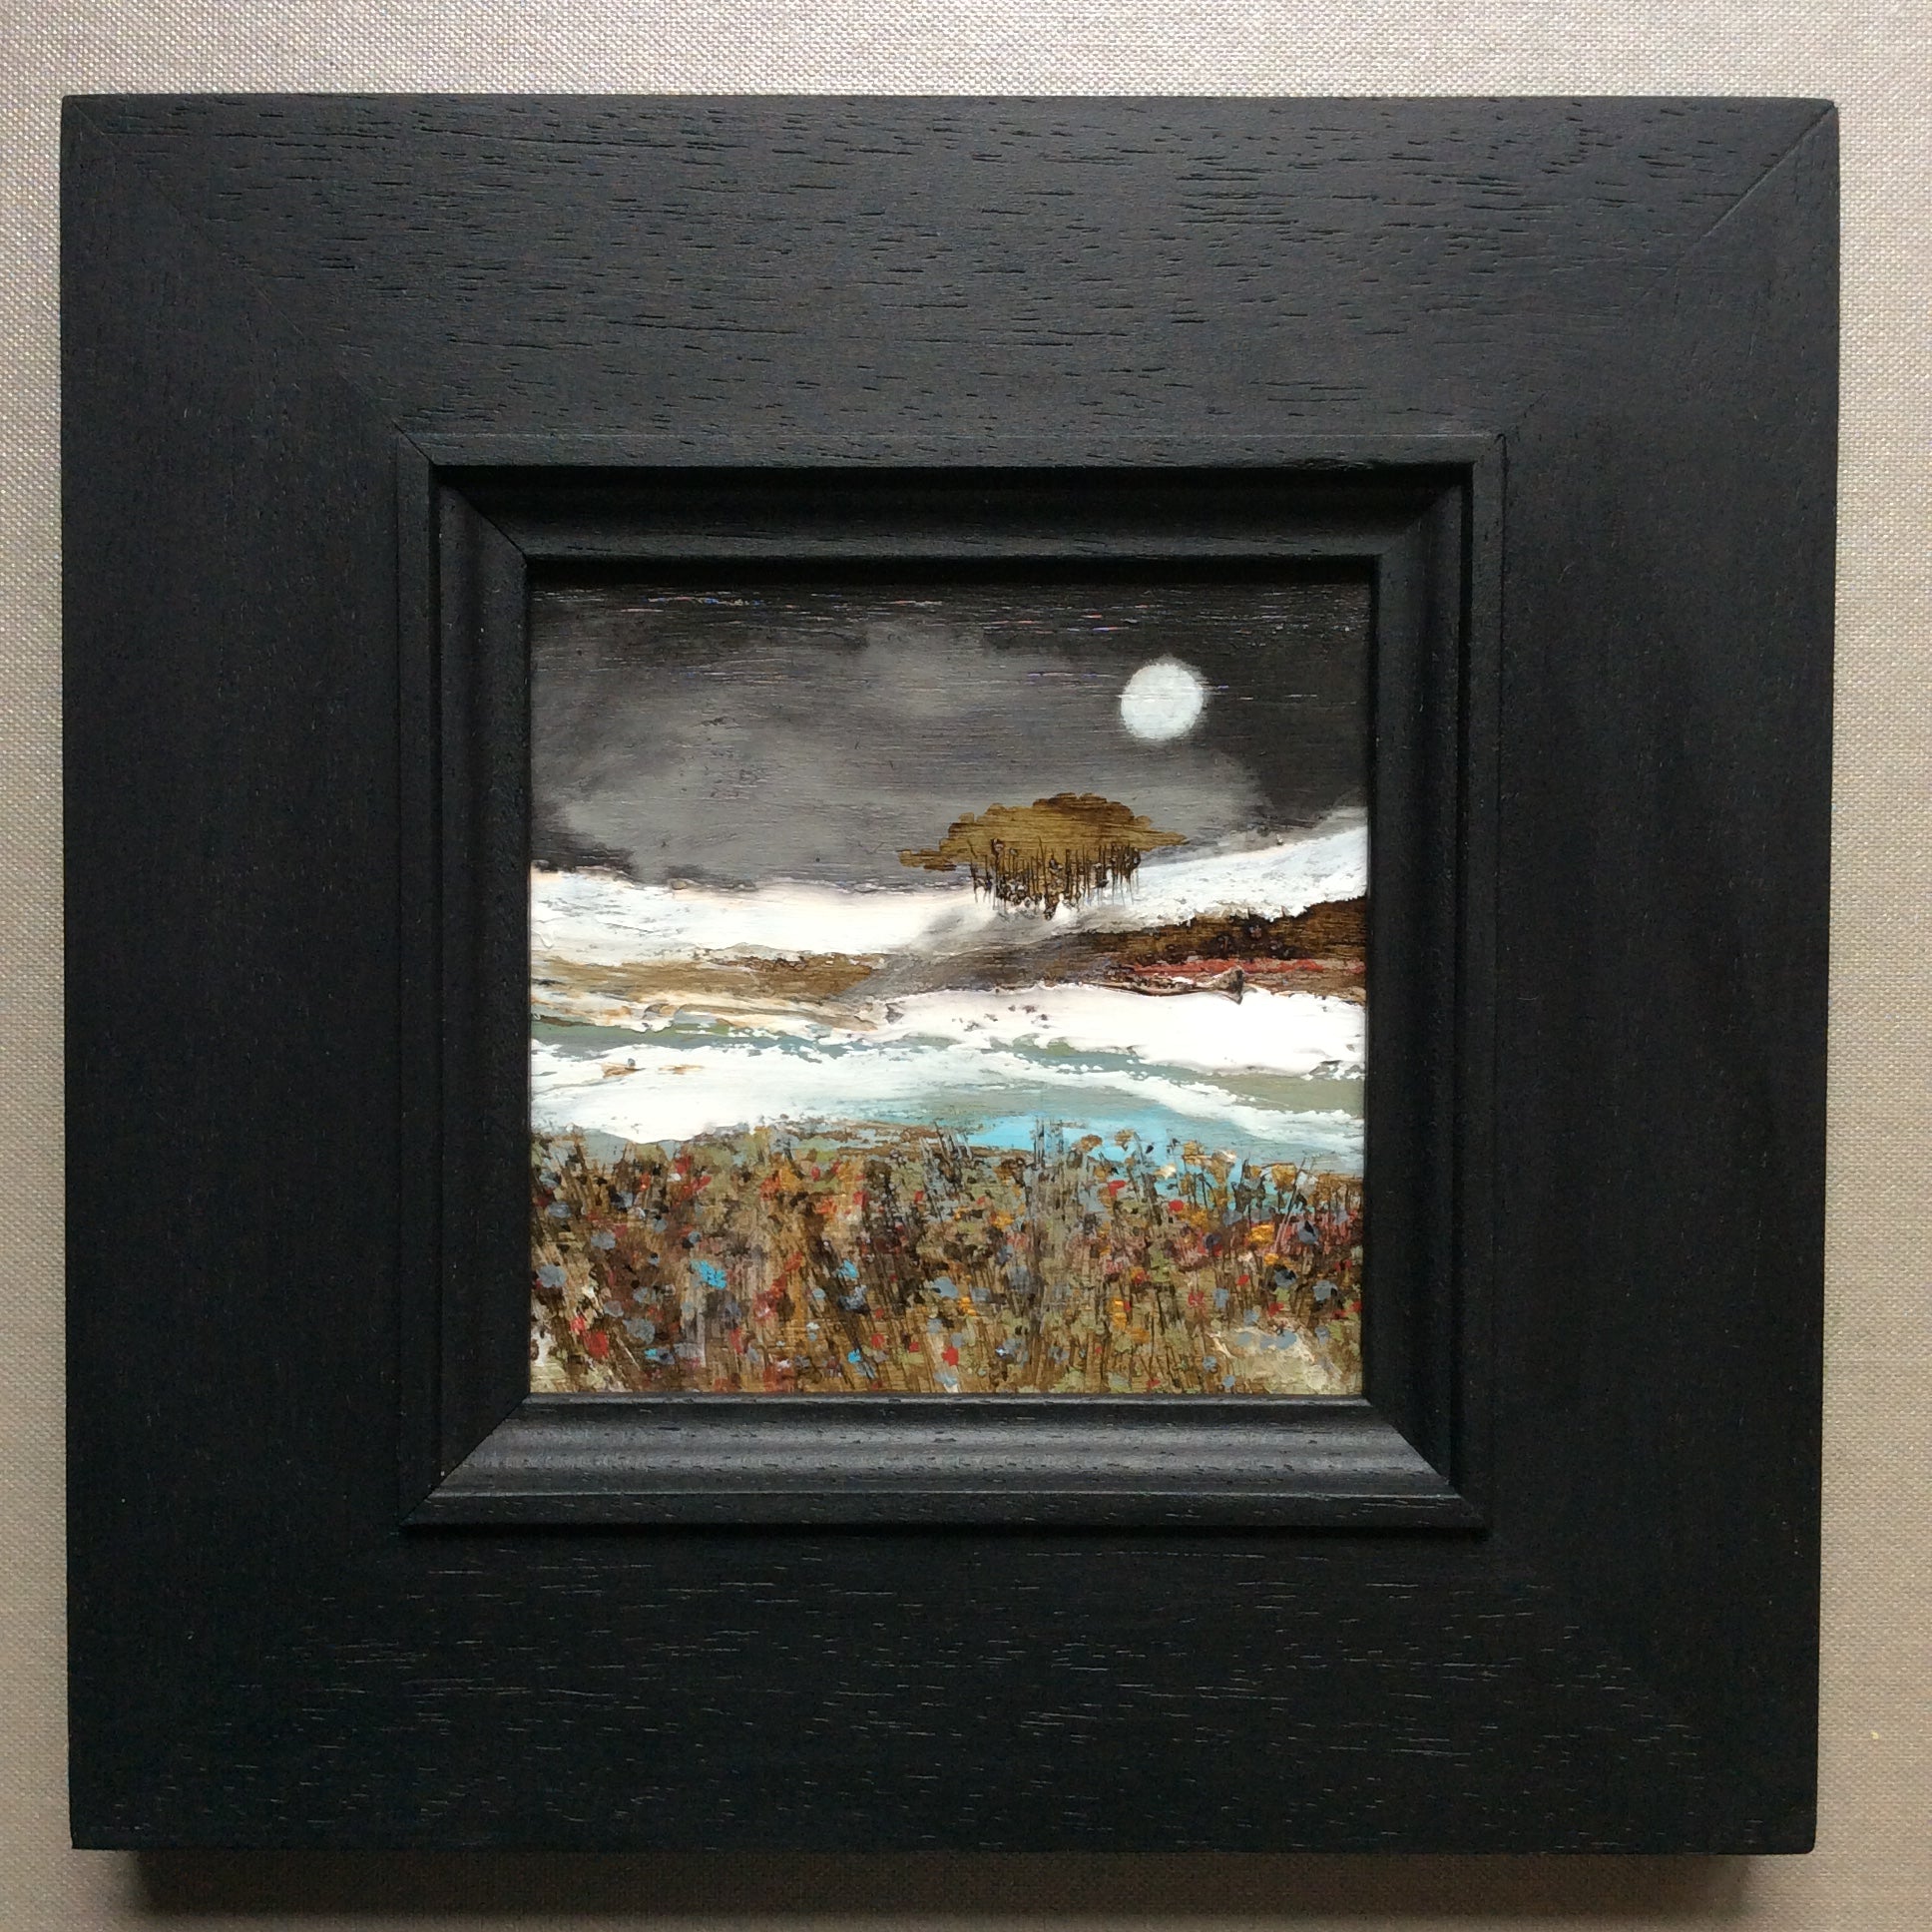 Mixed Media Art on wood By Louise O'Hara - "Evening Light”